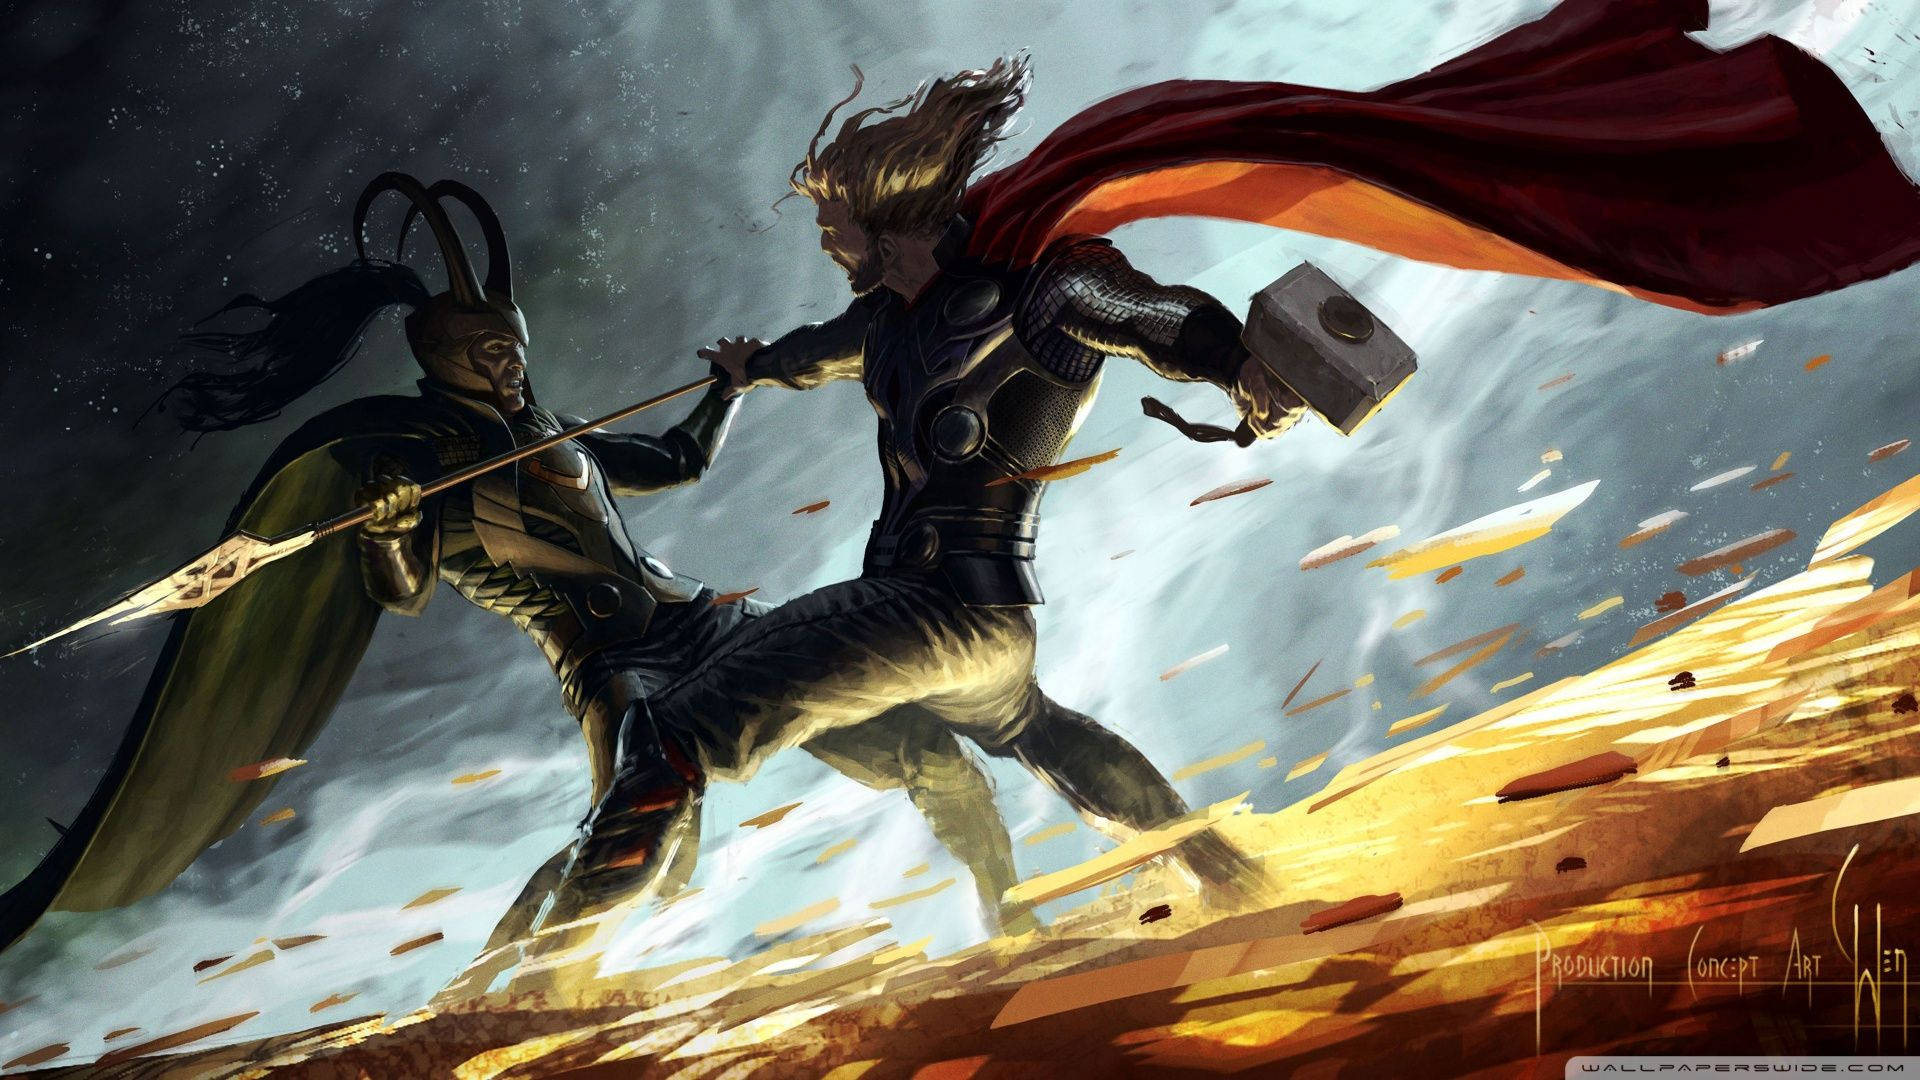 Download Thor vs Loki in epic battle of brothers Wallpaper